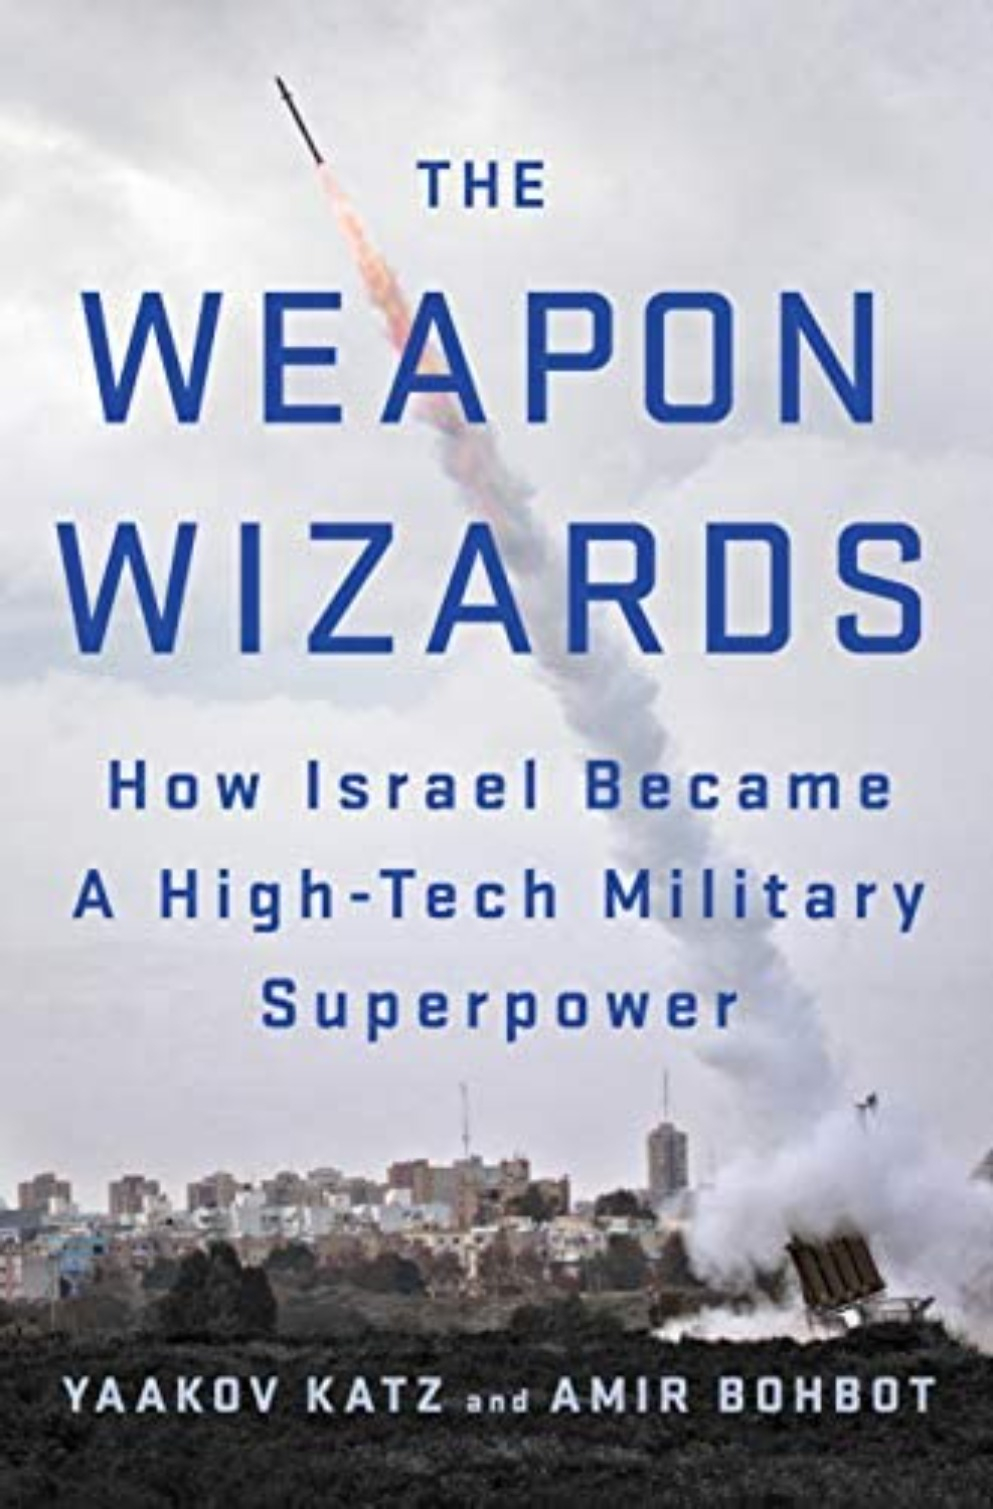 The Weapon Wizards by Yaakov Katz and Amir Bohbot